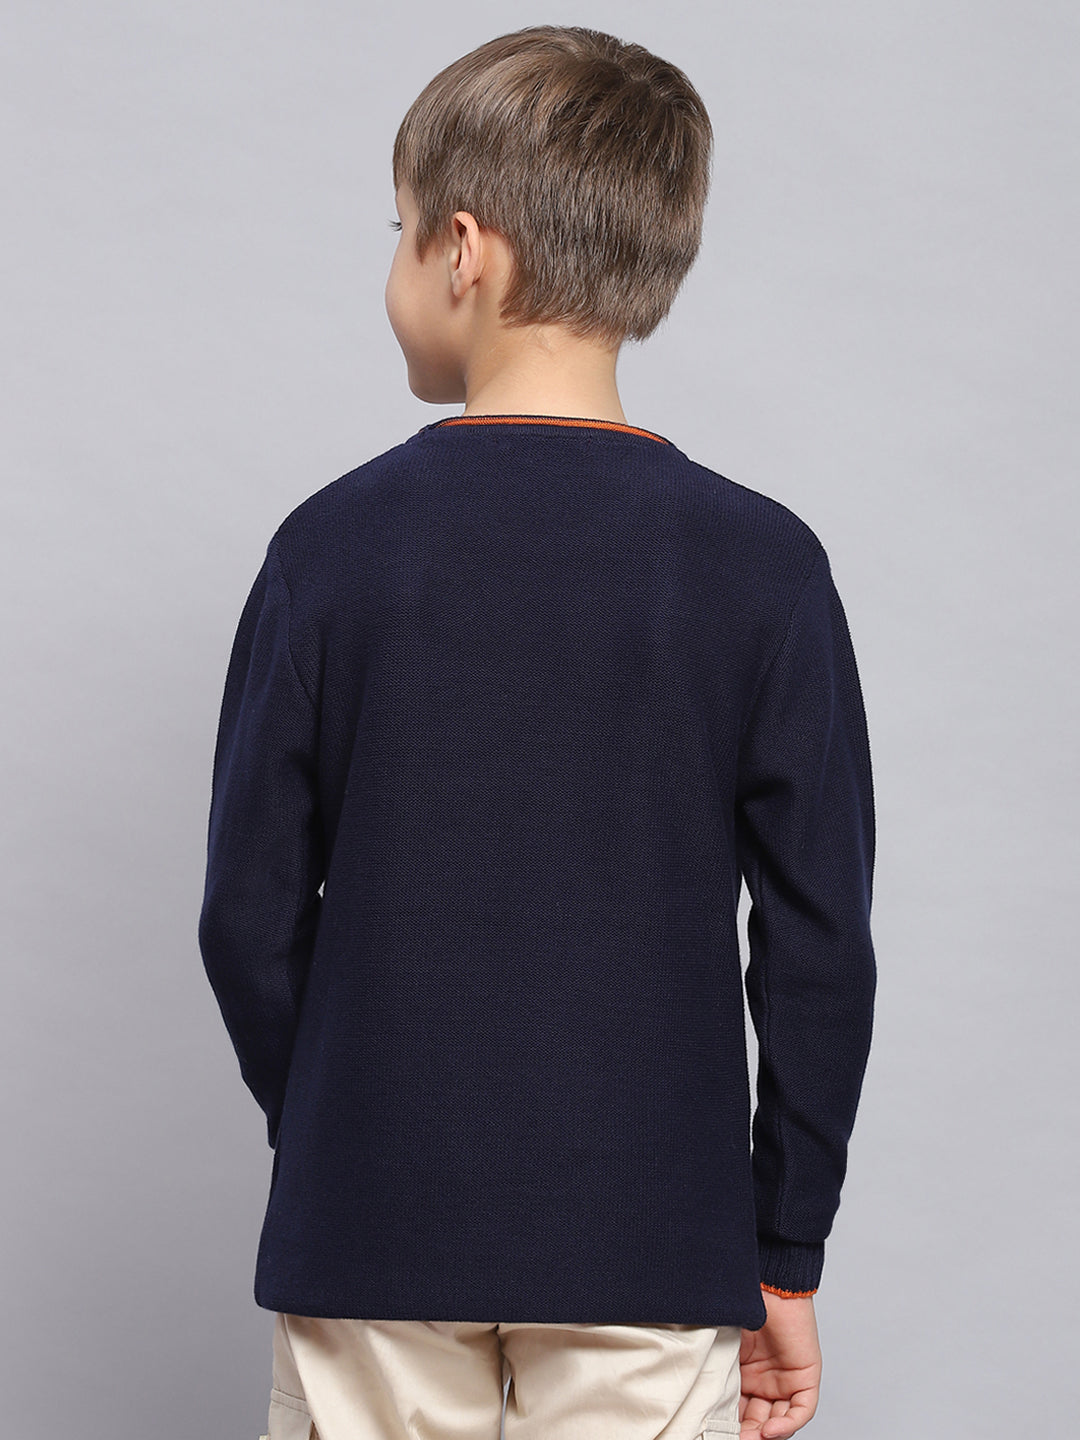 Boys Navy Blue Solid Round Neck Full Sleeve Sweater